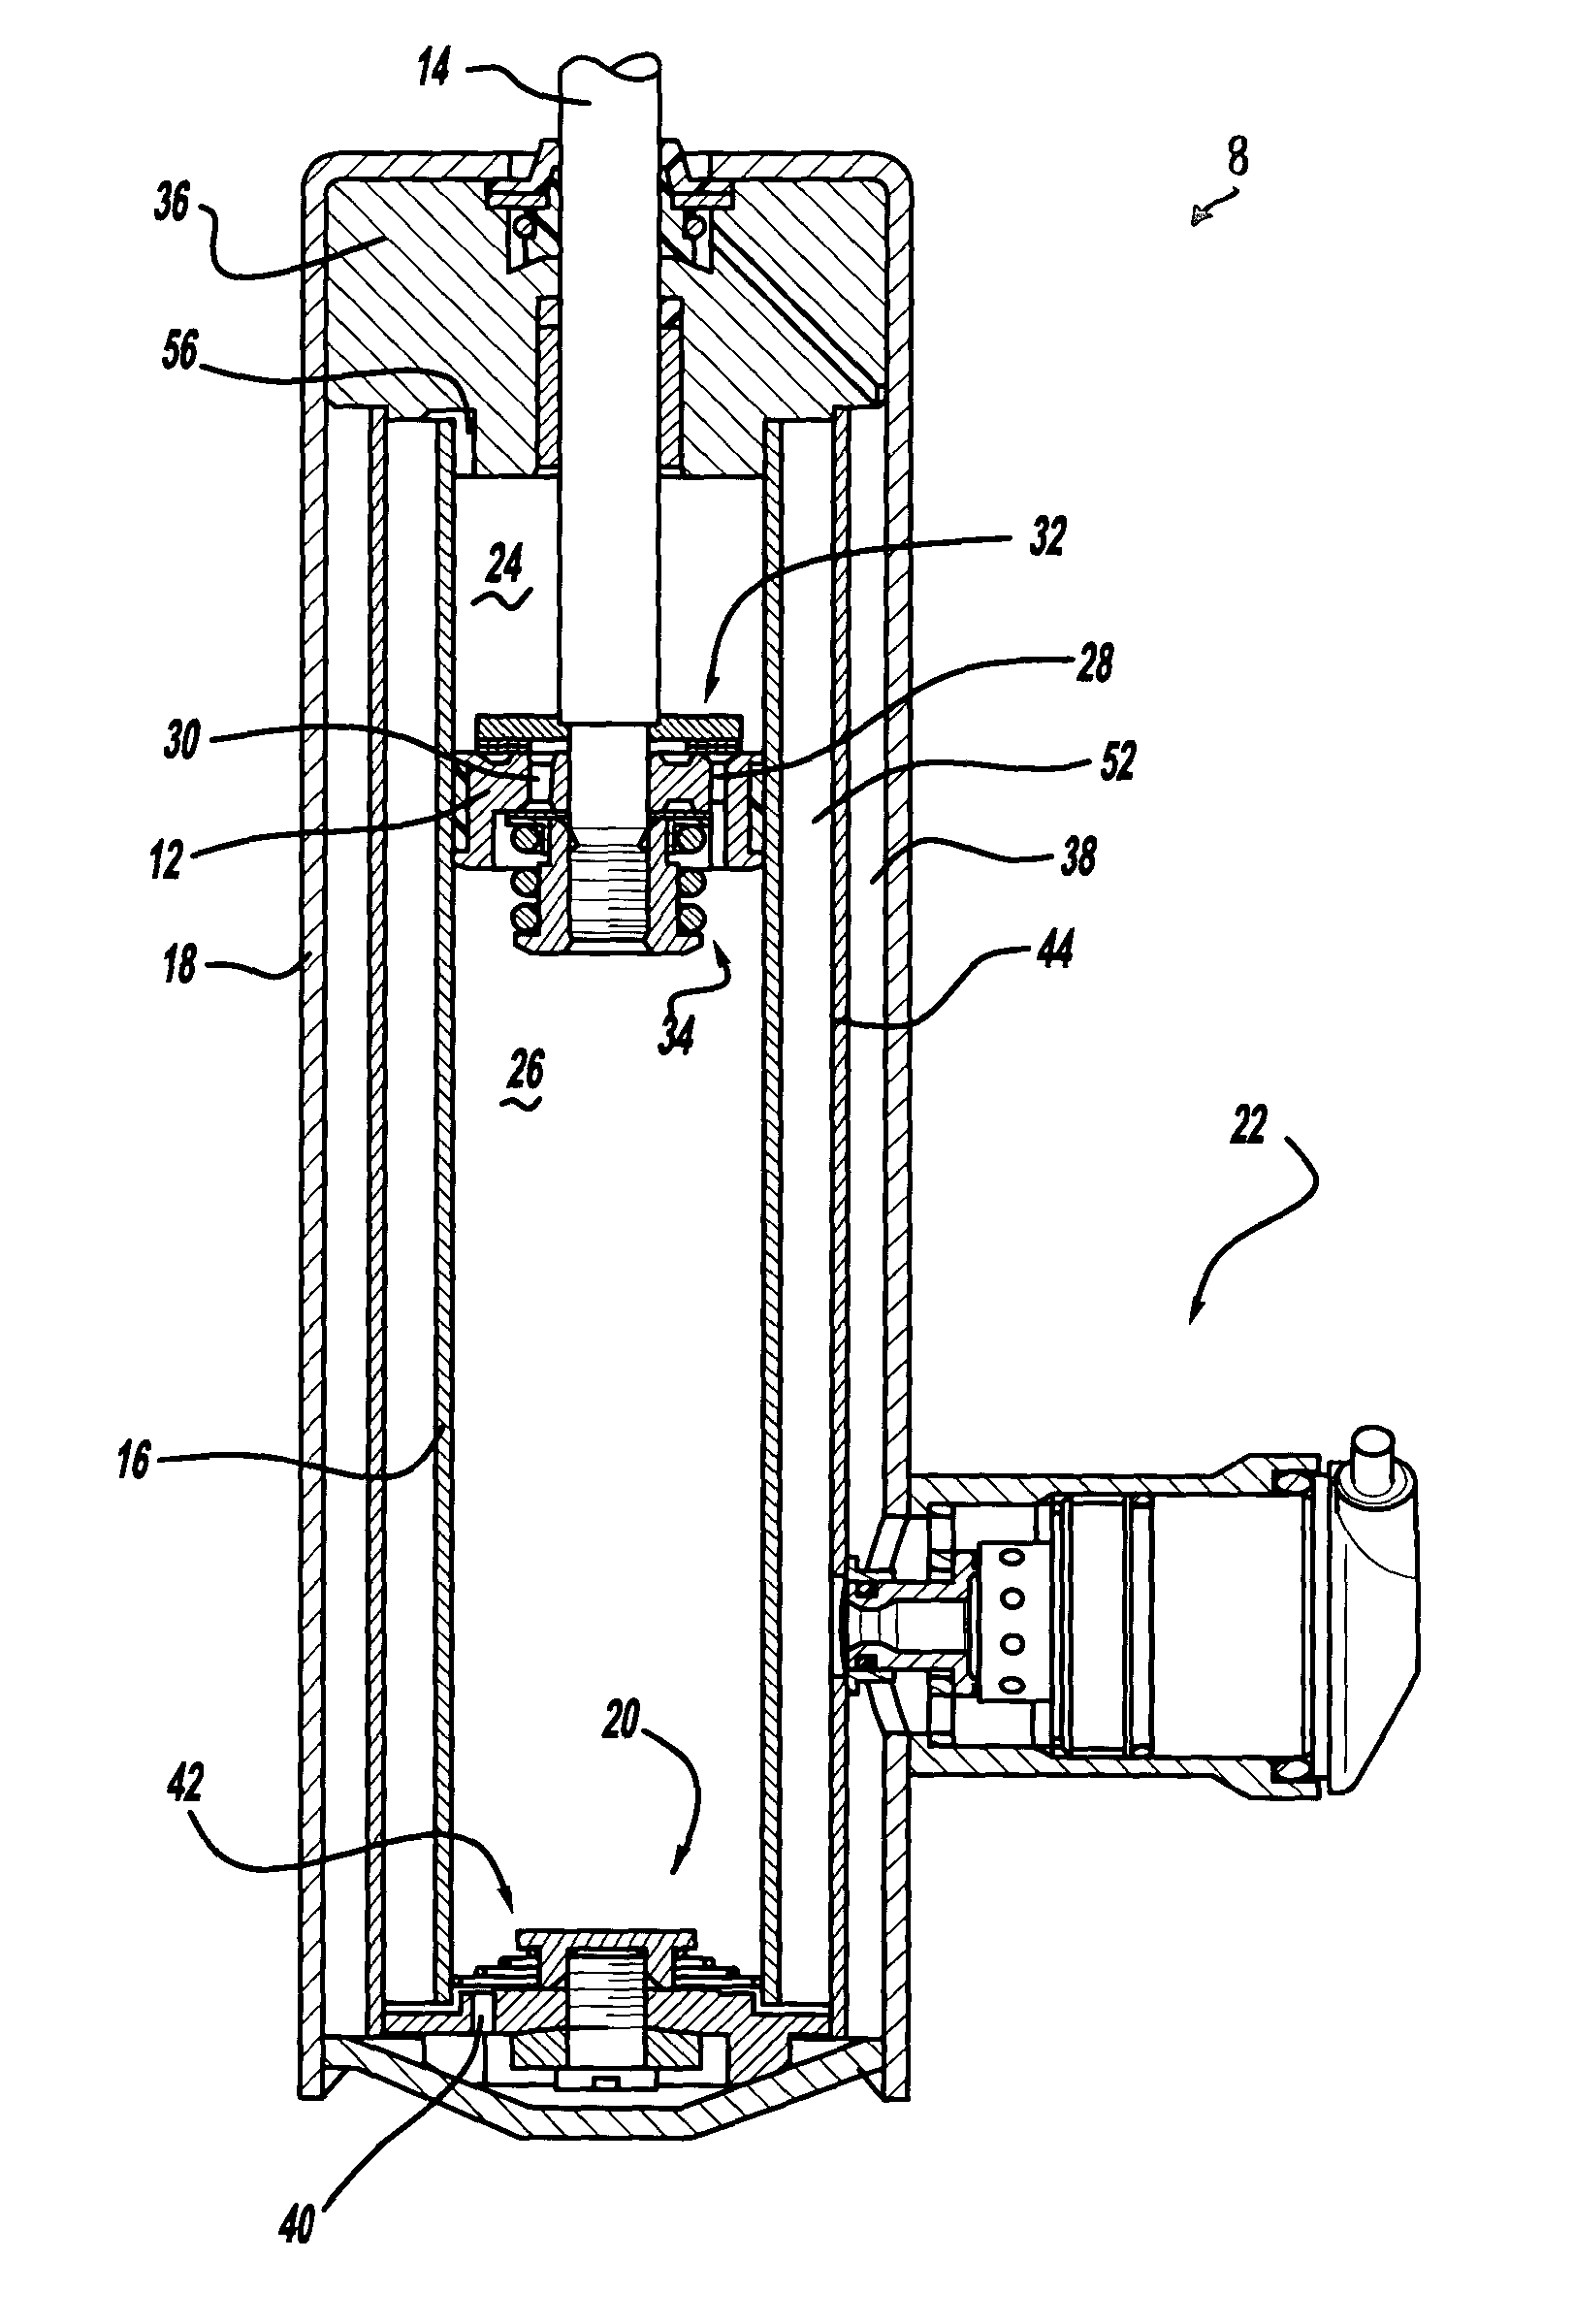 Adjustable damper with control valve, mounted in an external collar